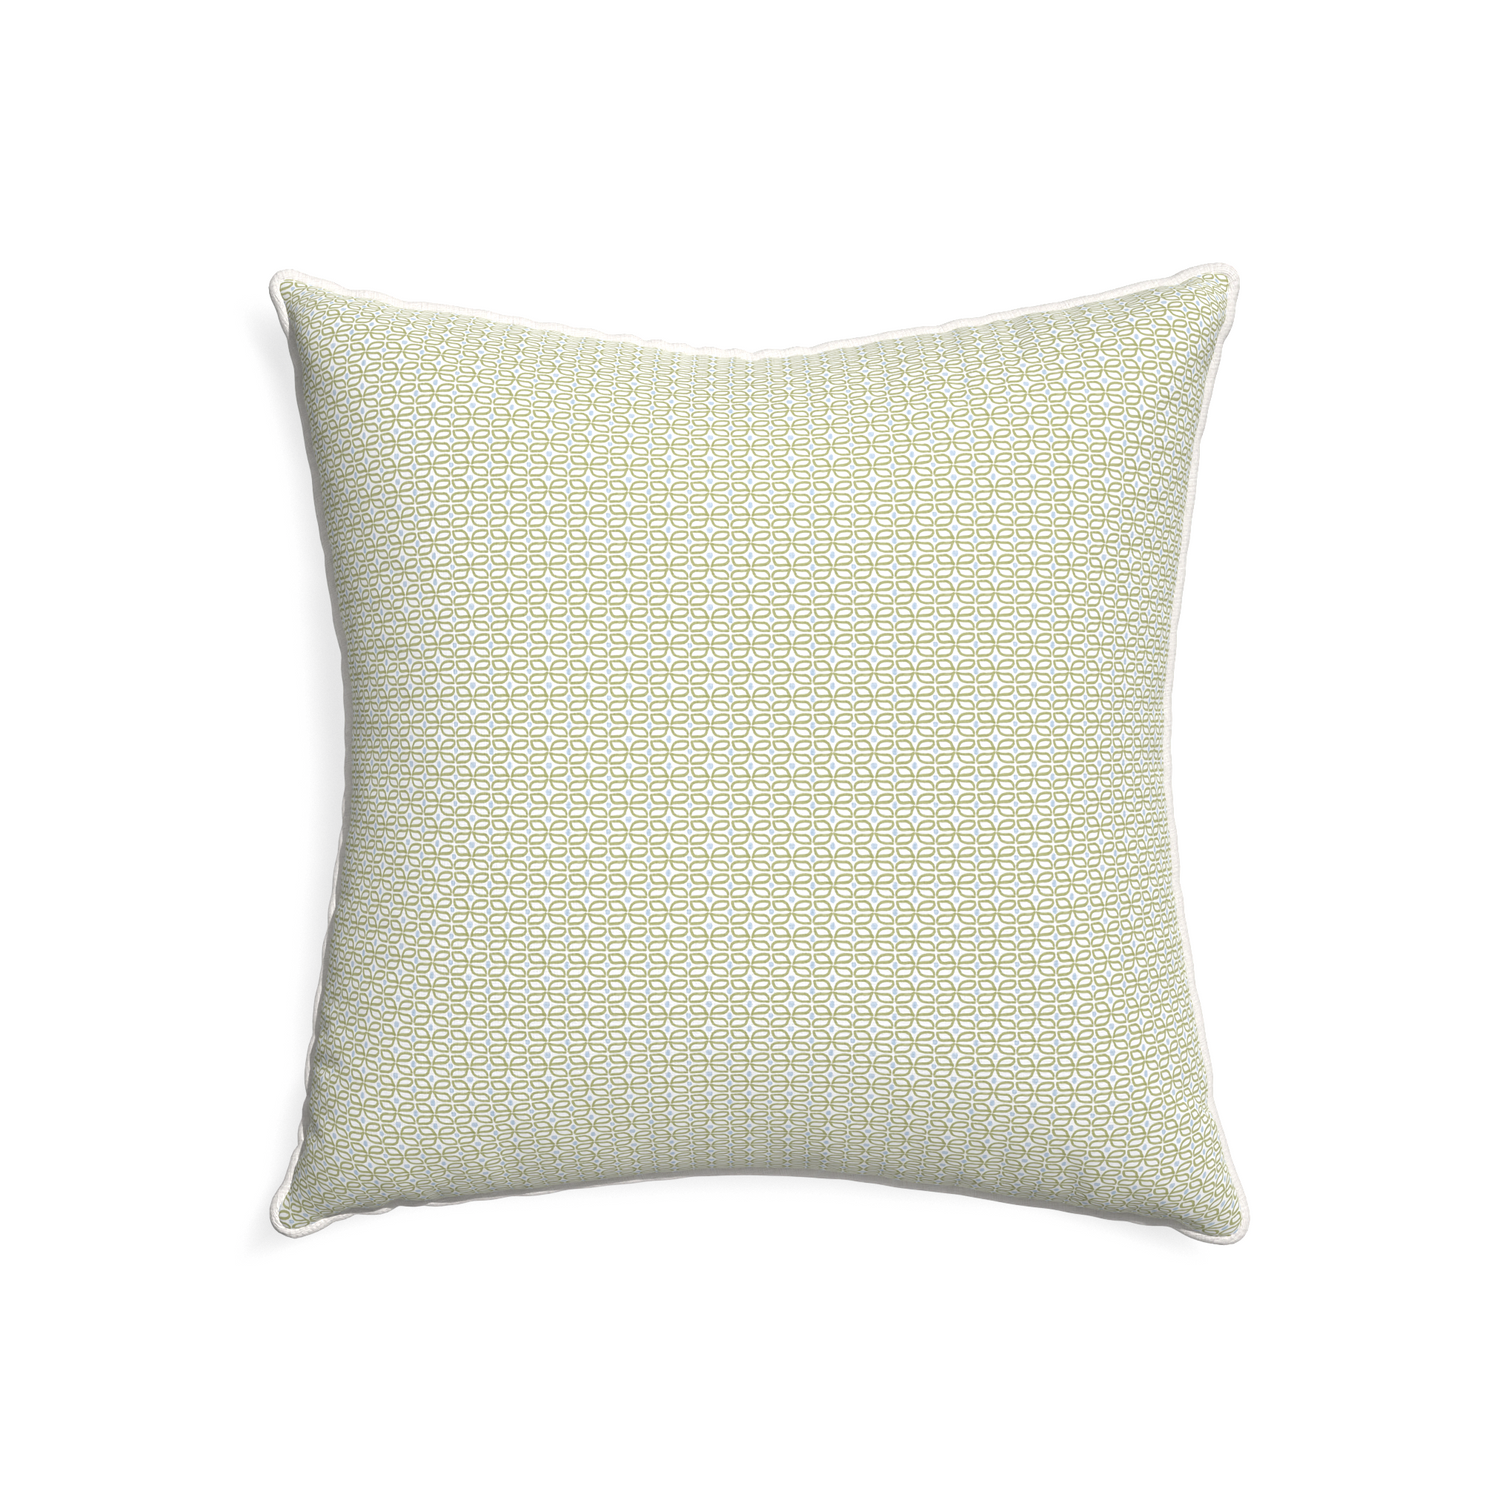 22-square loomi moss custom pillow with snow piping on white background